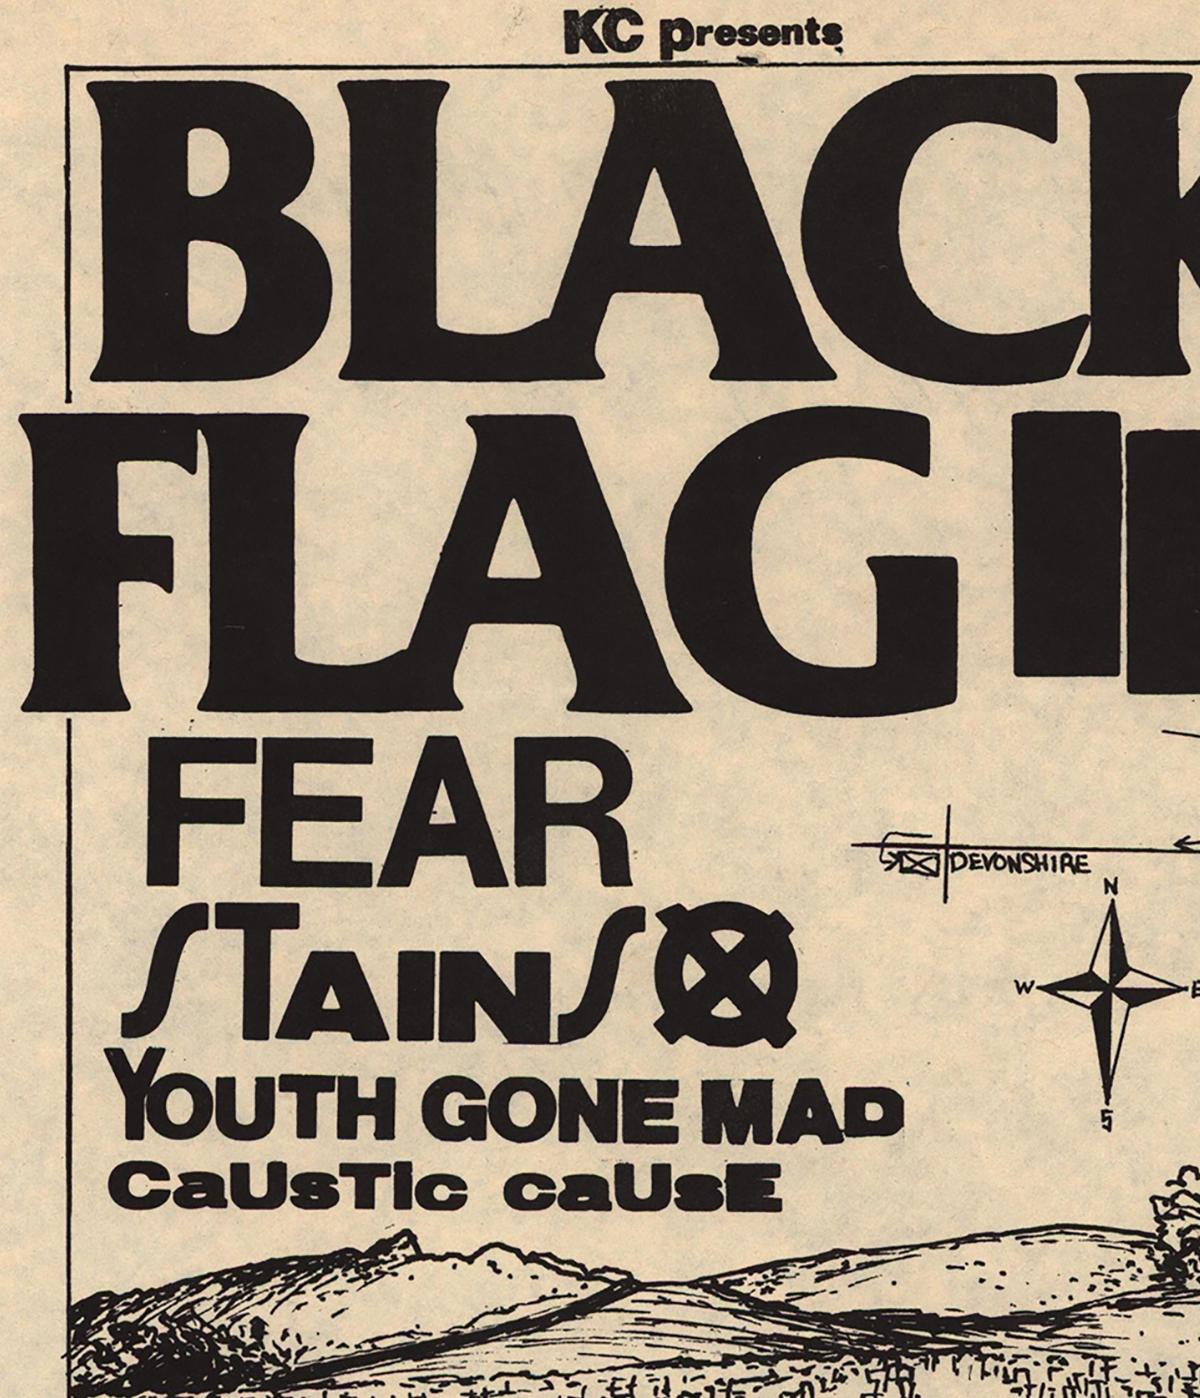 Raymond Pettibon Black Flag, 1981: 
Rare early Raymond Pettibon Black Flag Punk Flyer - illustrated by Pettibon on the occasion of: Black Flag, Stains, Youth Gone Mad, Caustic Cause, Fear at Devonshire Downs, Sep 11, 1981. An exceptionally rare,